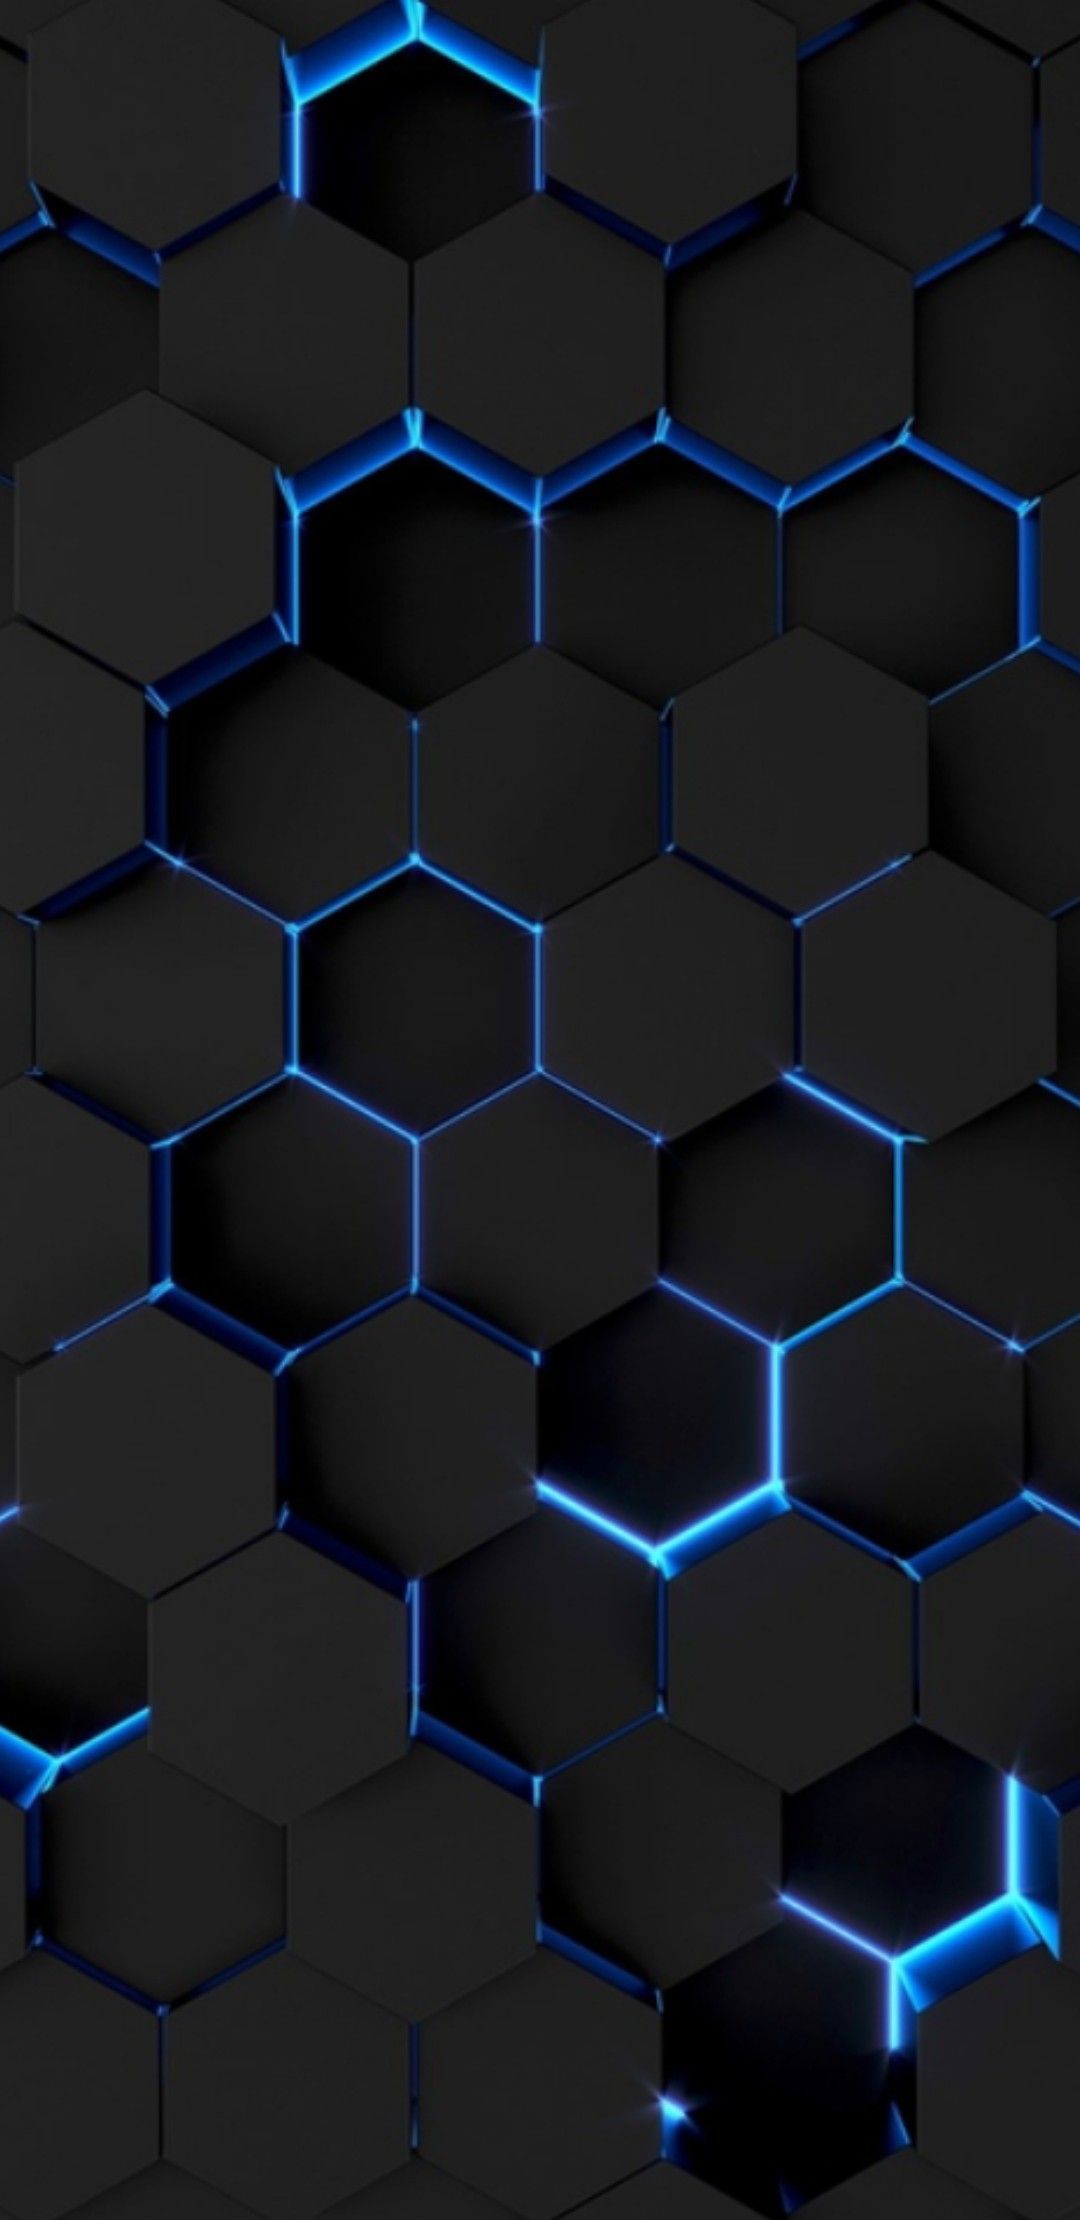 Hd Black And Blue Wallpaper For Mobile